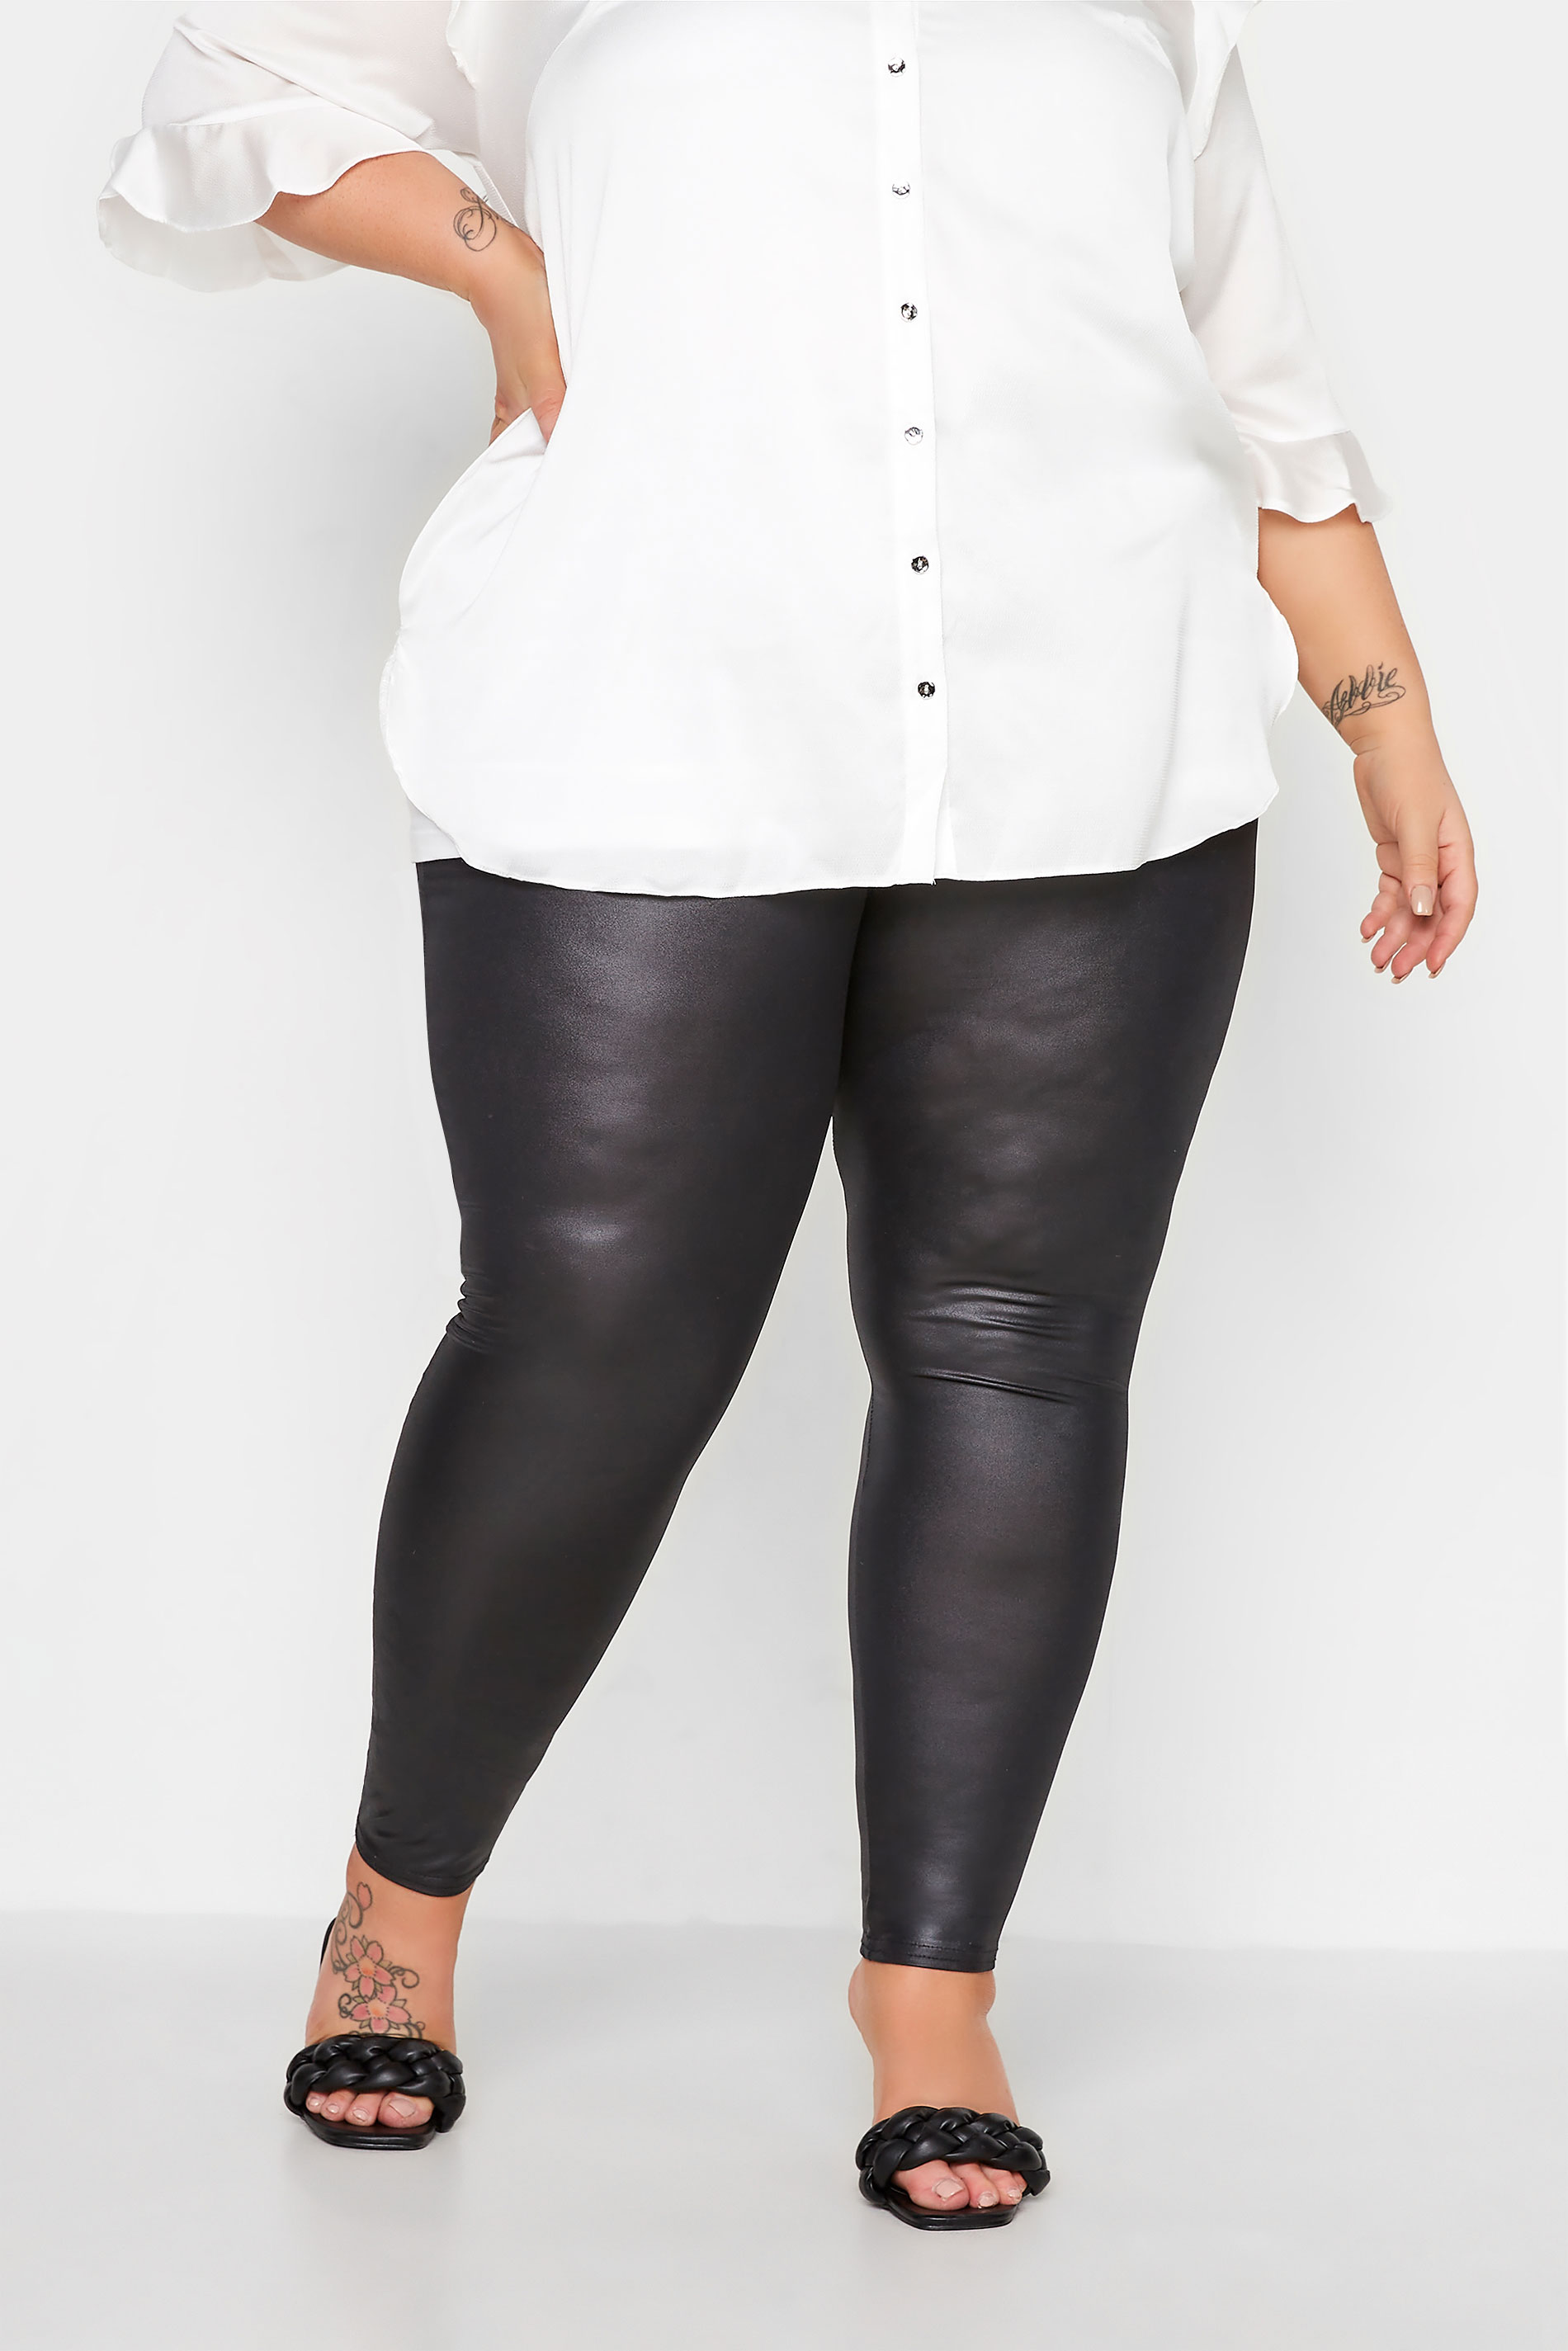 Plus Size Black Wet Look Stretch Leggings | Yours Clothing 1